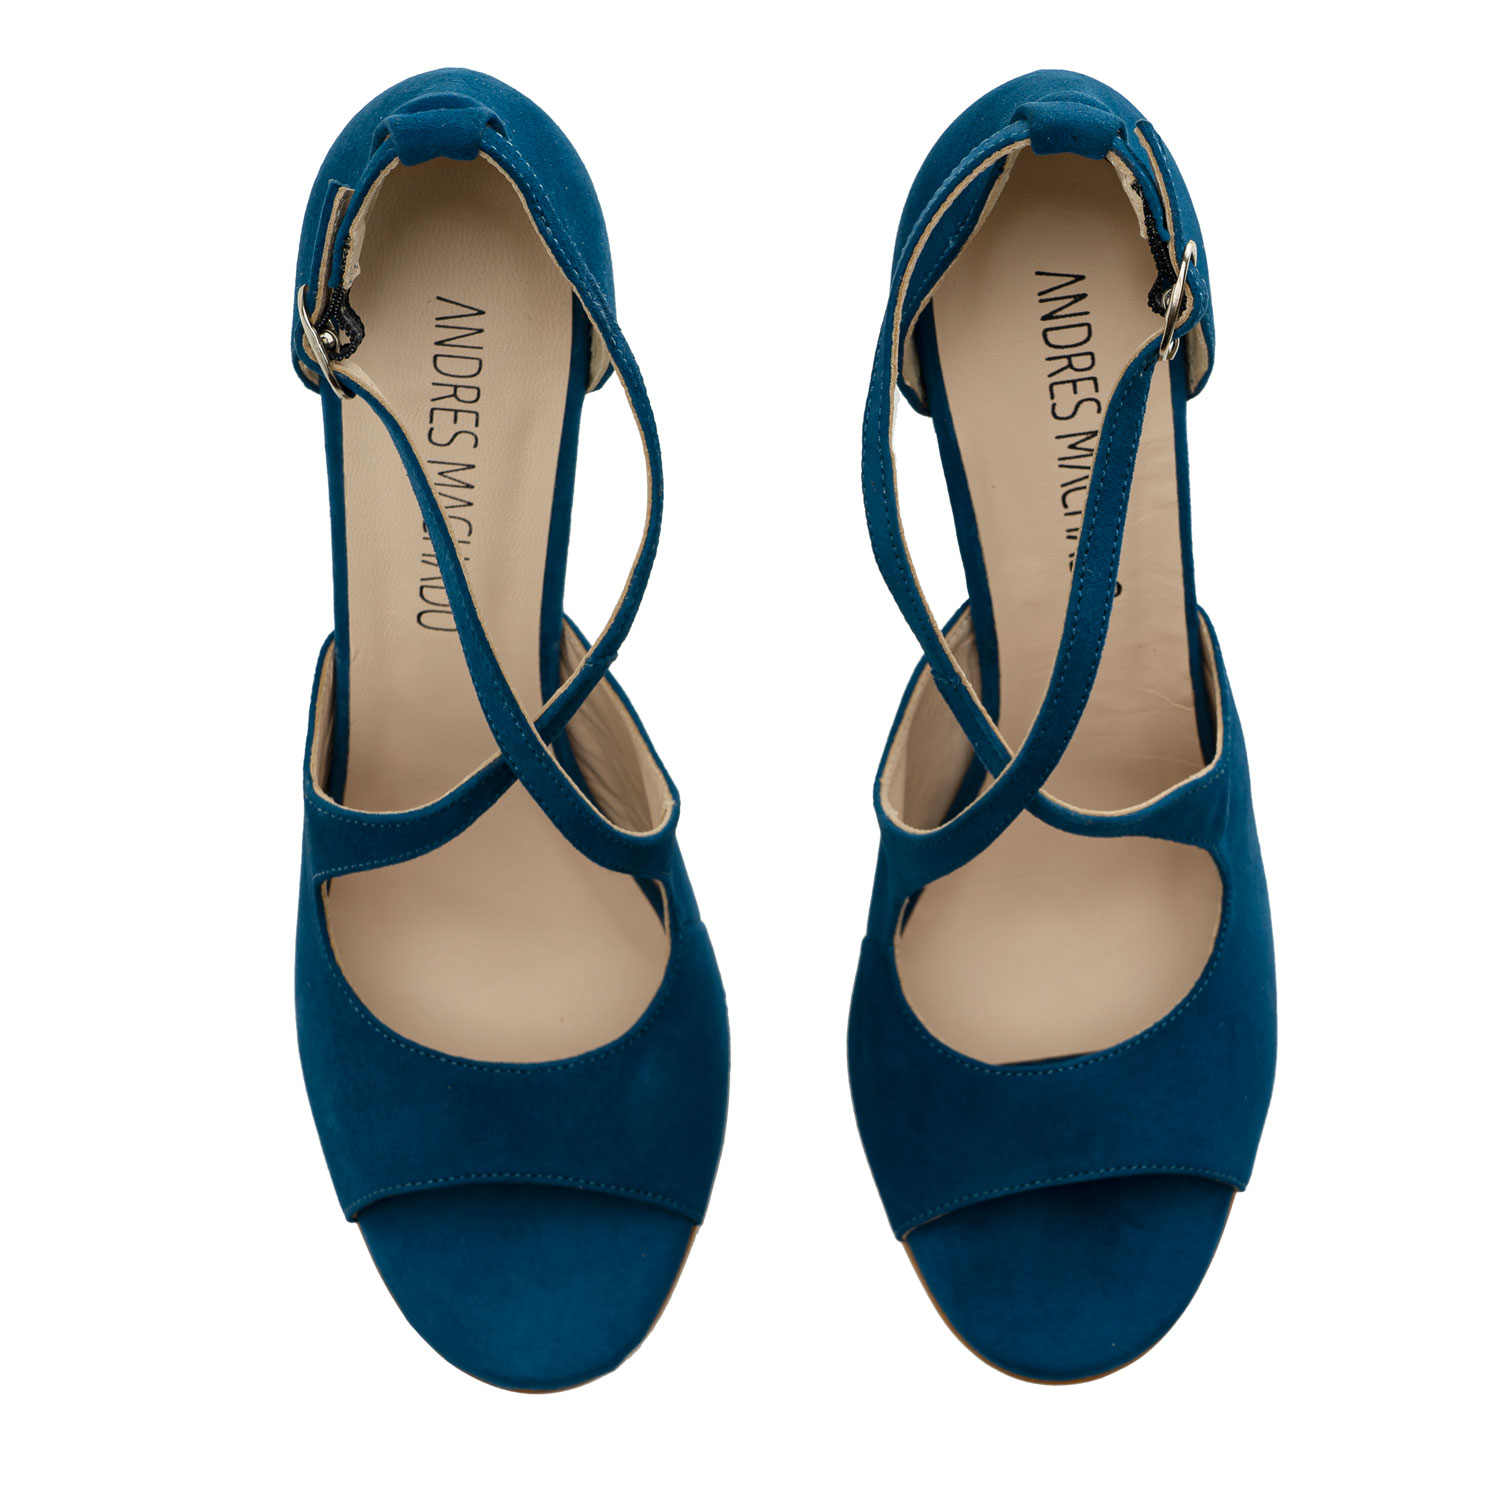 Stiletto Crossed Sandals in Deep Blue Suede Leather 